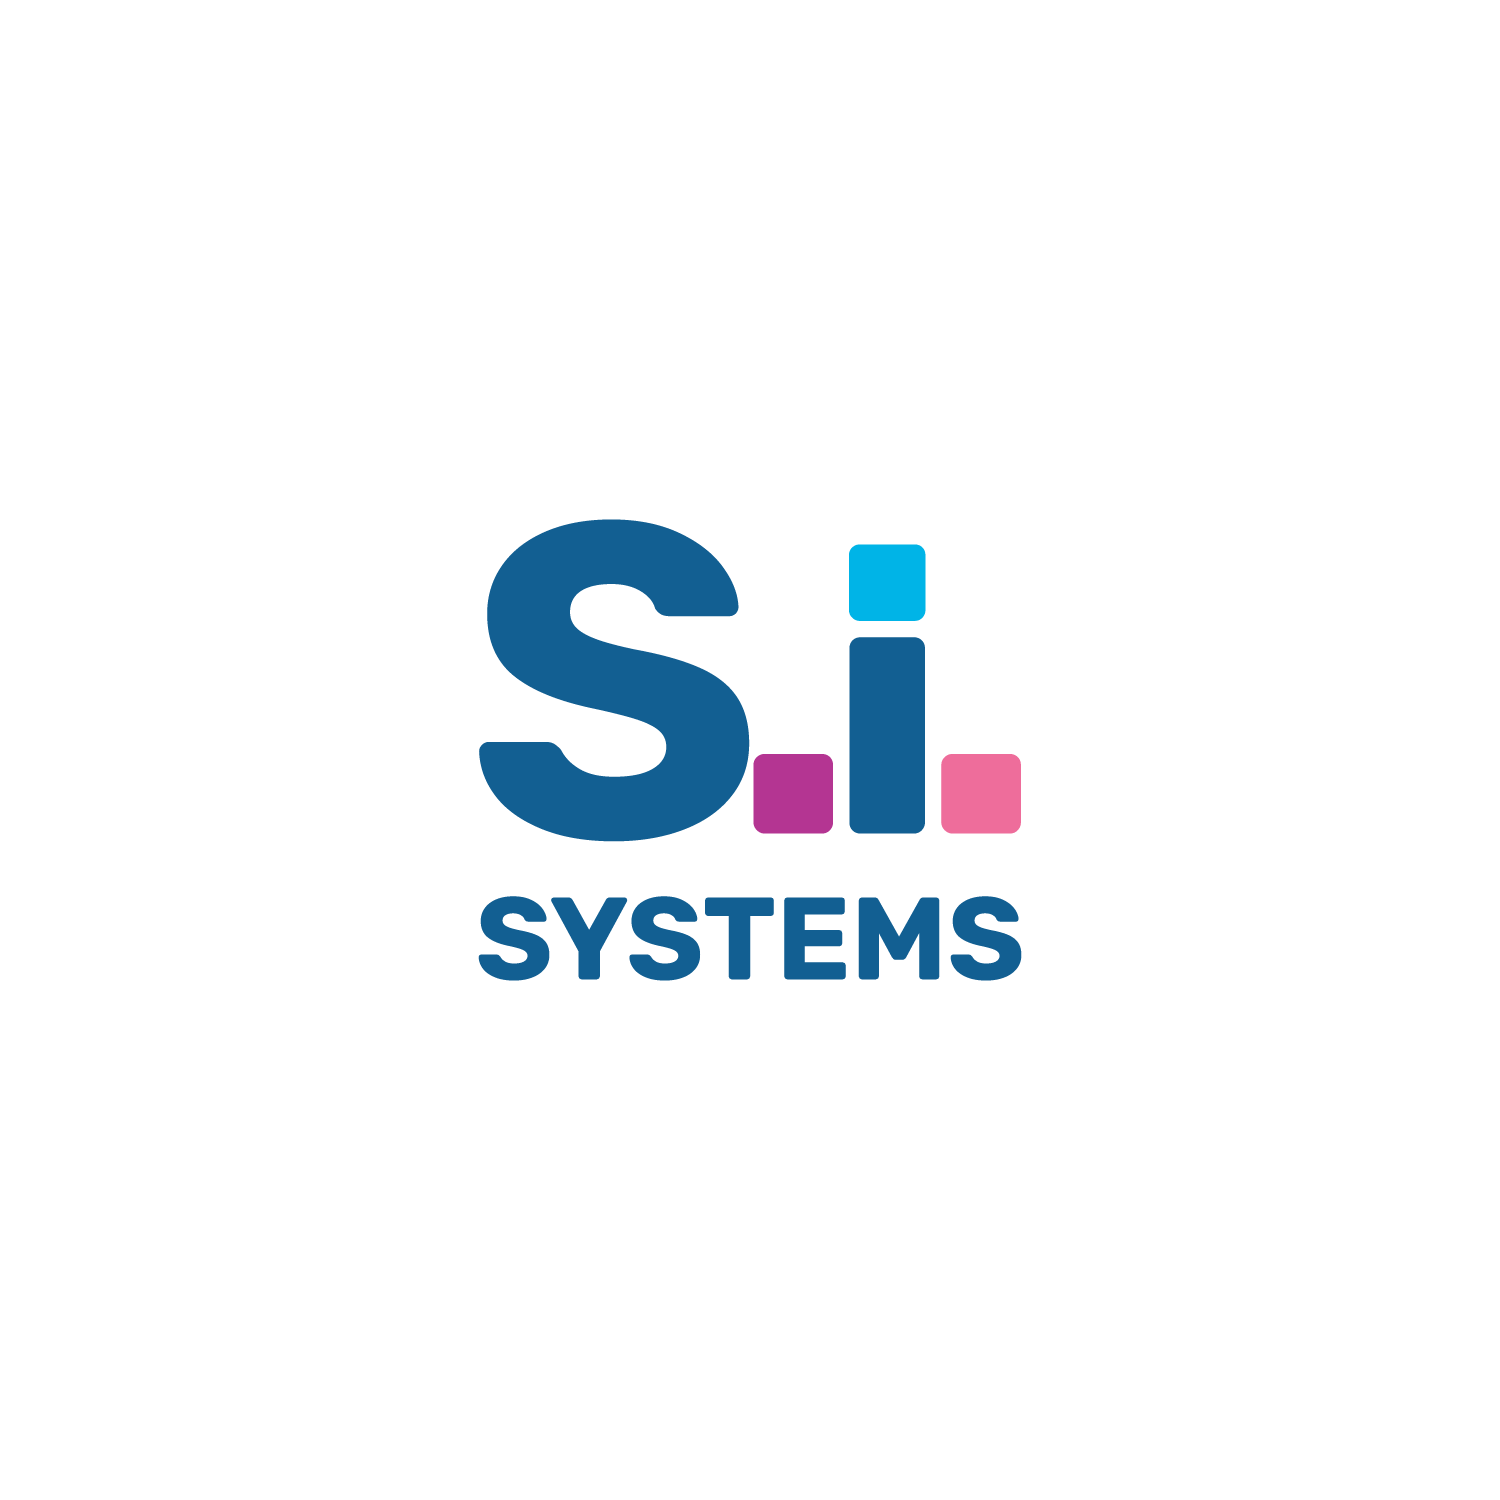 xiBOSS Corporation has been successfully acquired by S.i. Systems